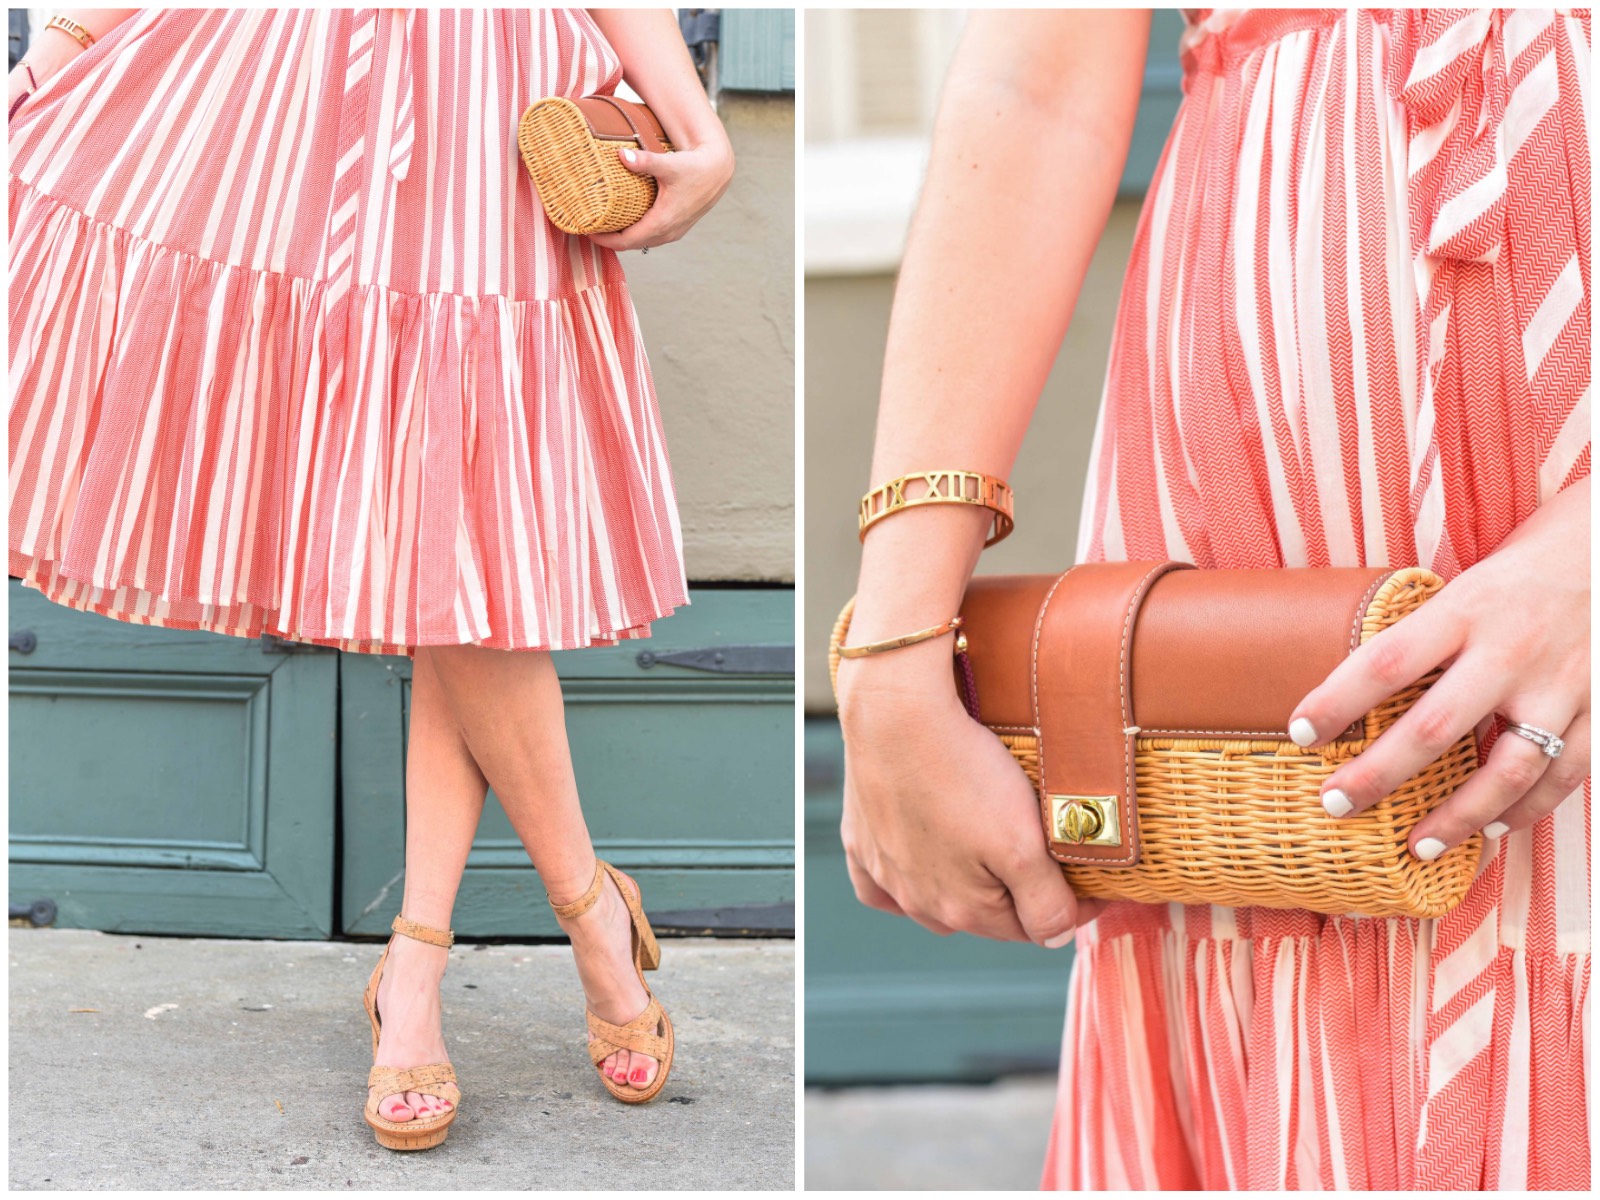 Accessorizing for summer with Elaine Turner cork heels and a J. McLaughlin wicker clutch.